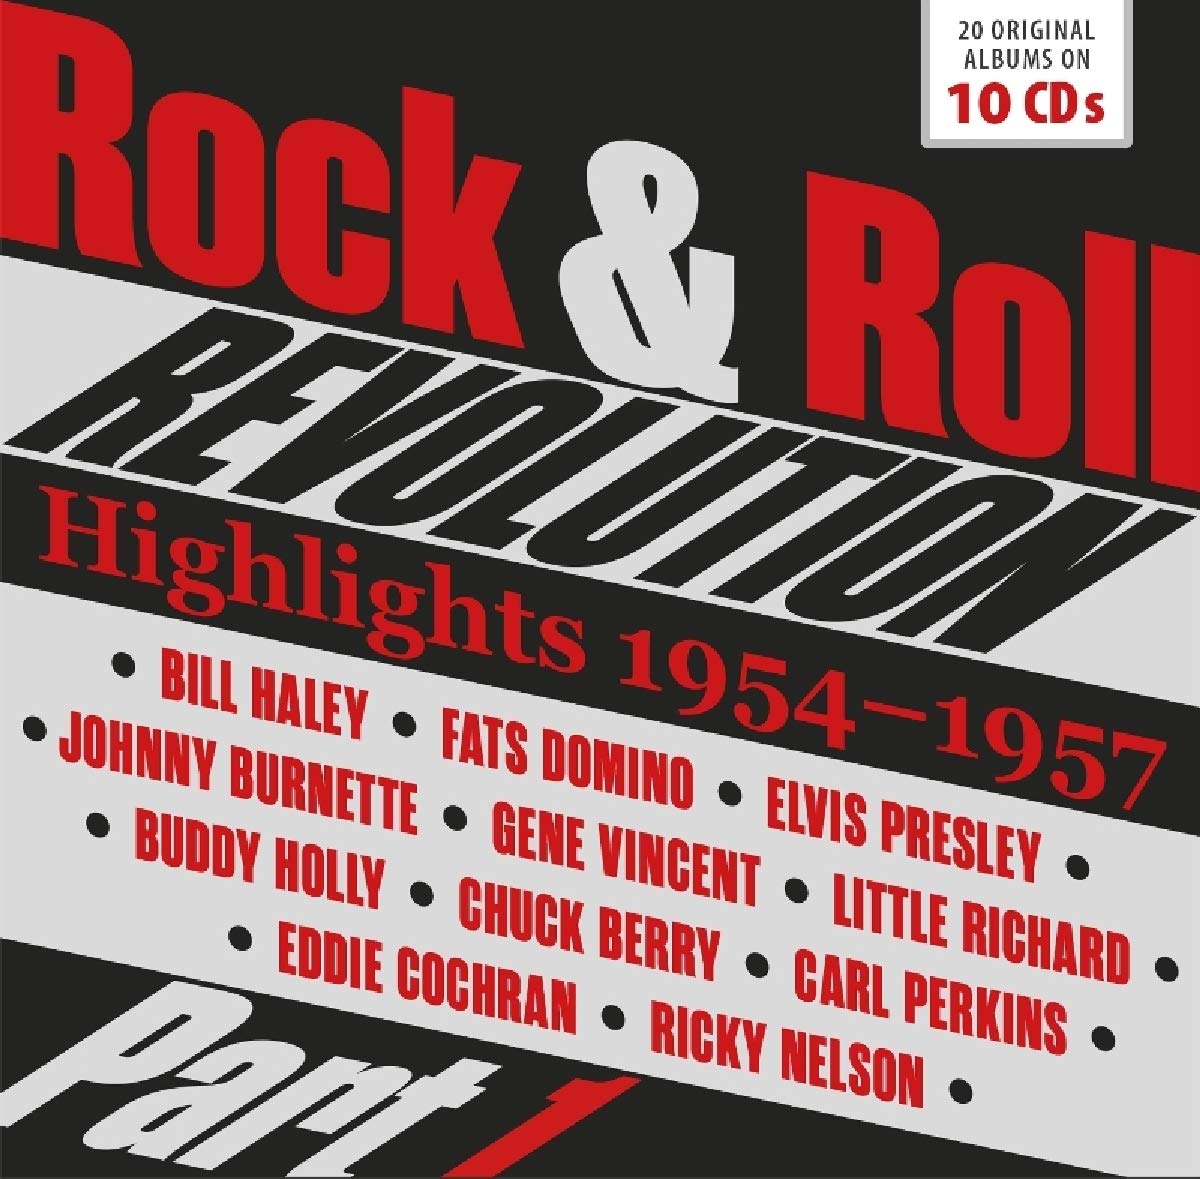 Rock 'n' Roll Revolution - Elvis Presley, Bill Haley, Ricky Nelson, Fats Domino and More (10 CDs)